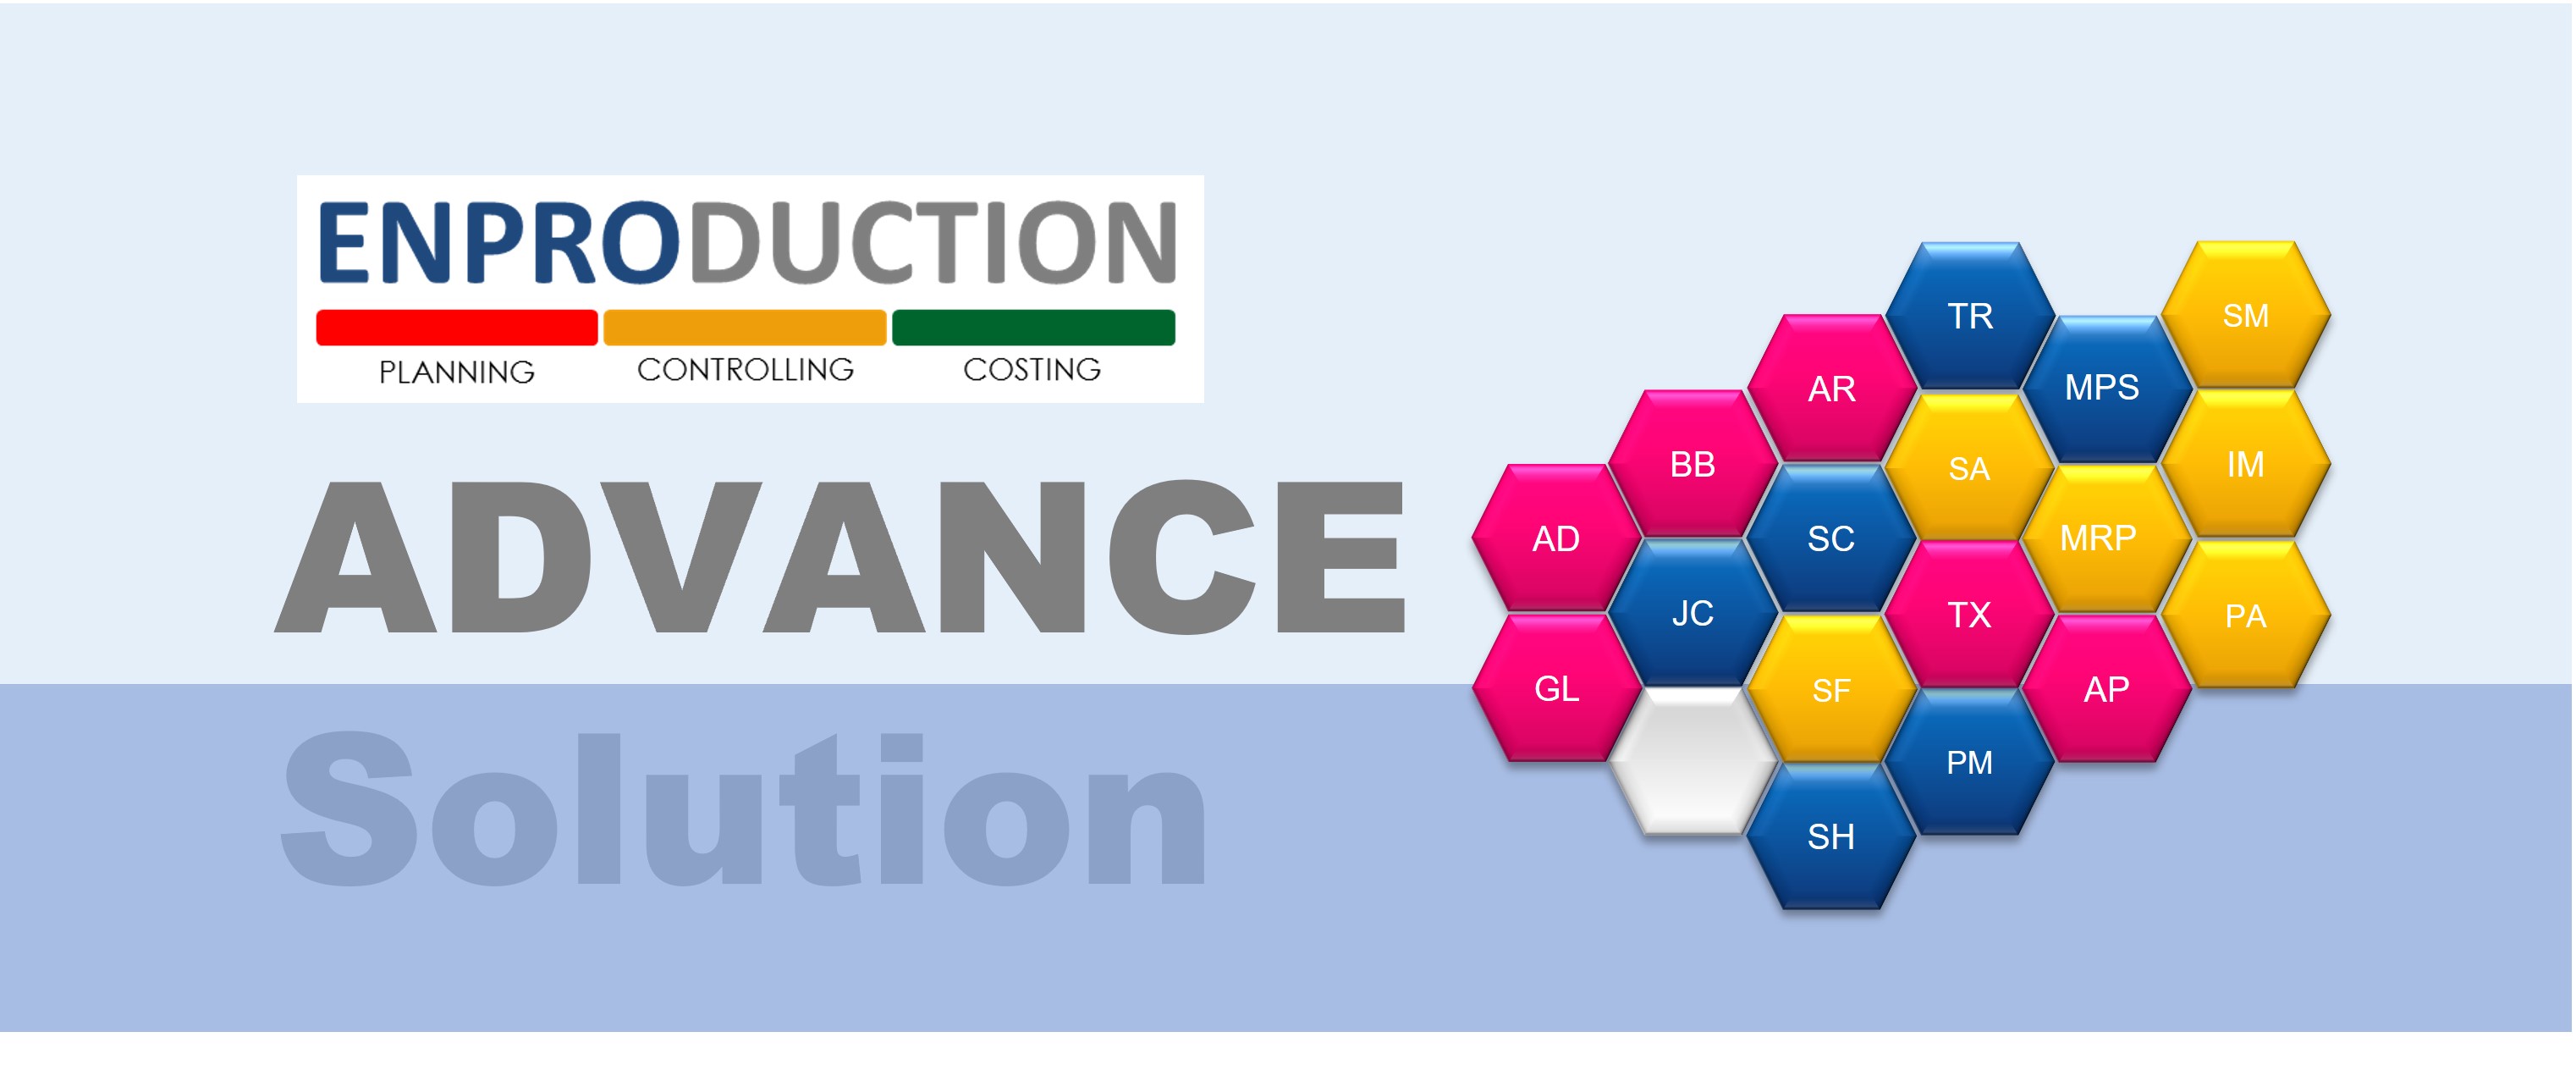 enpro advance enproduction erp manufacturing production planing costing software